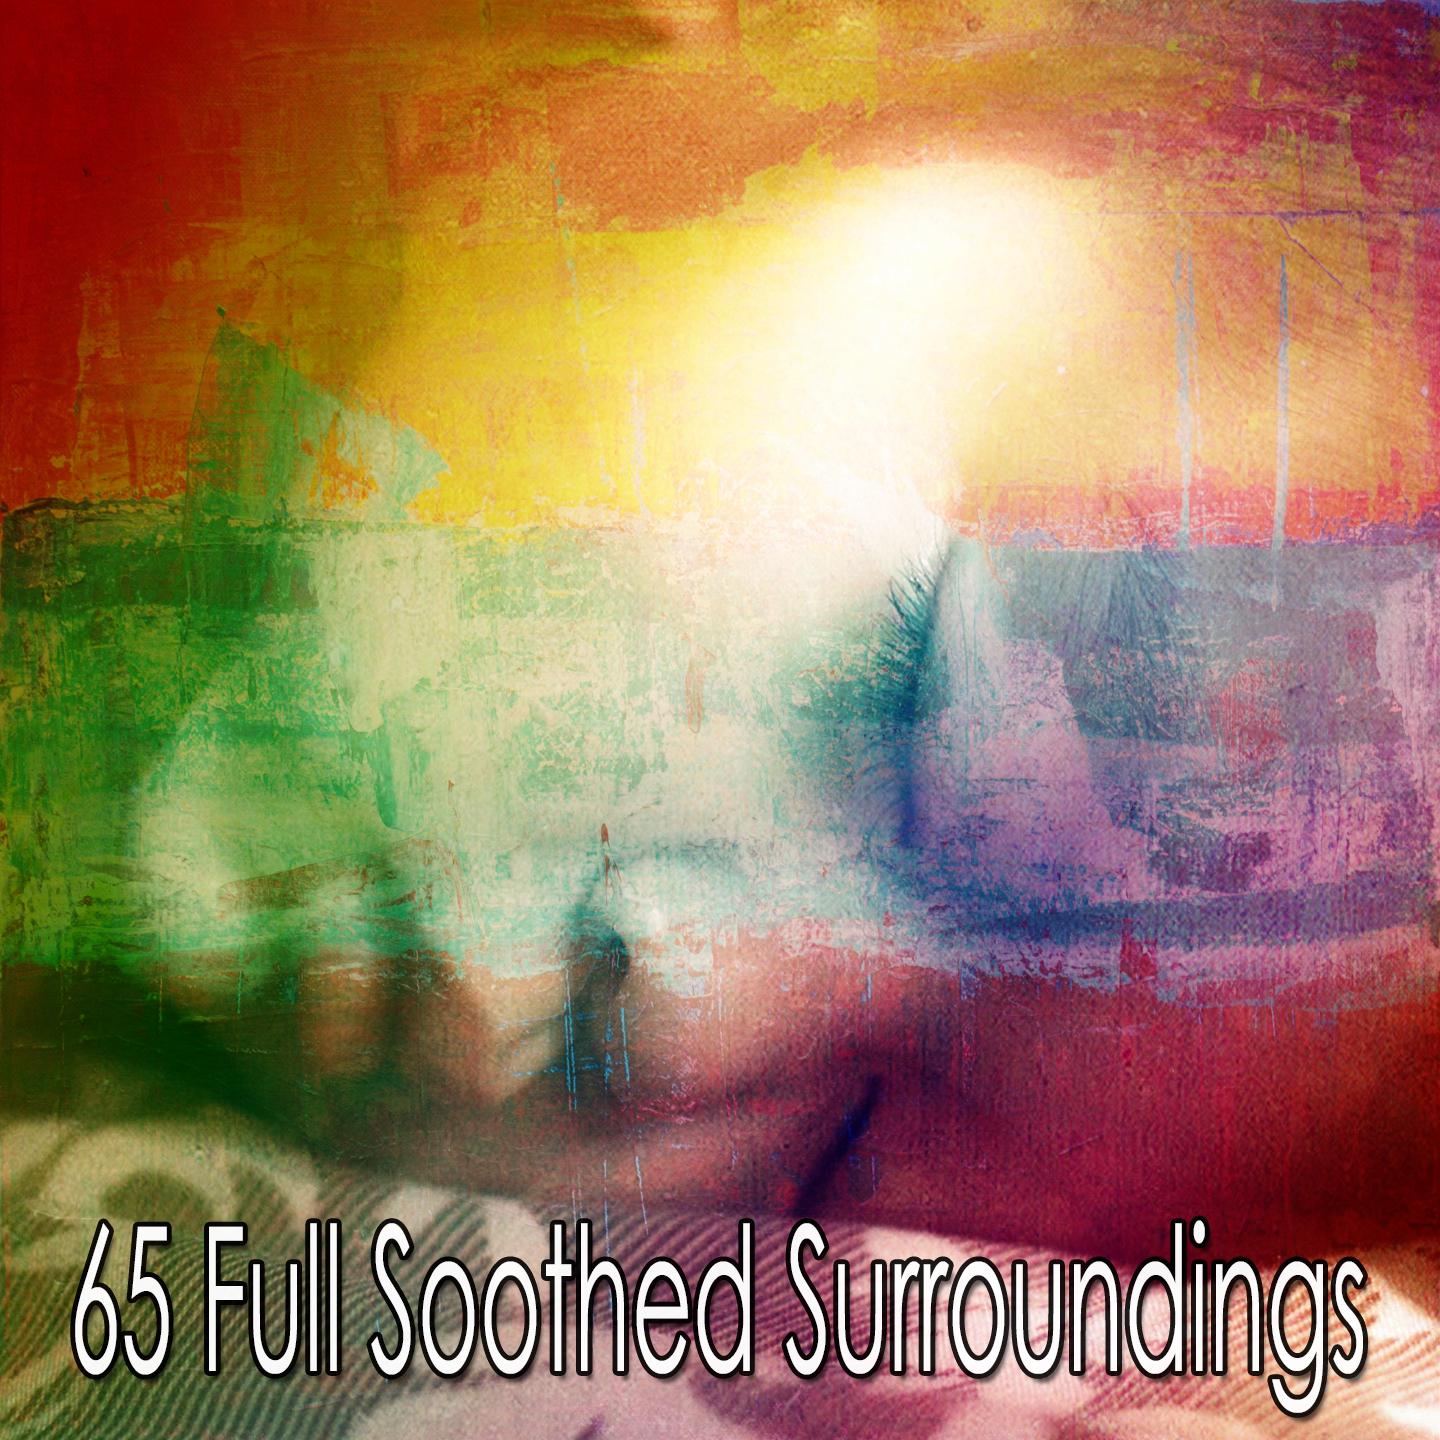 65 Full Soothed Surroundings